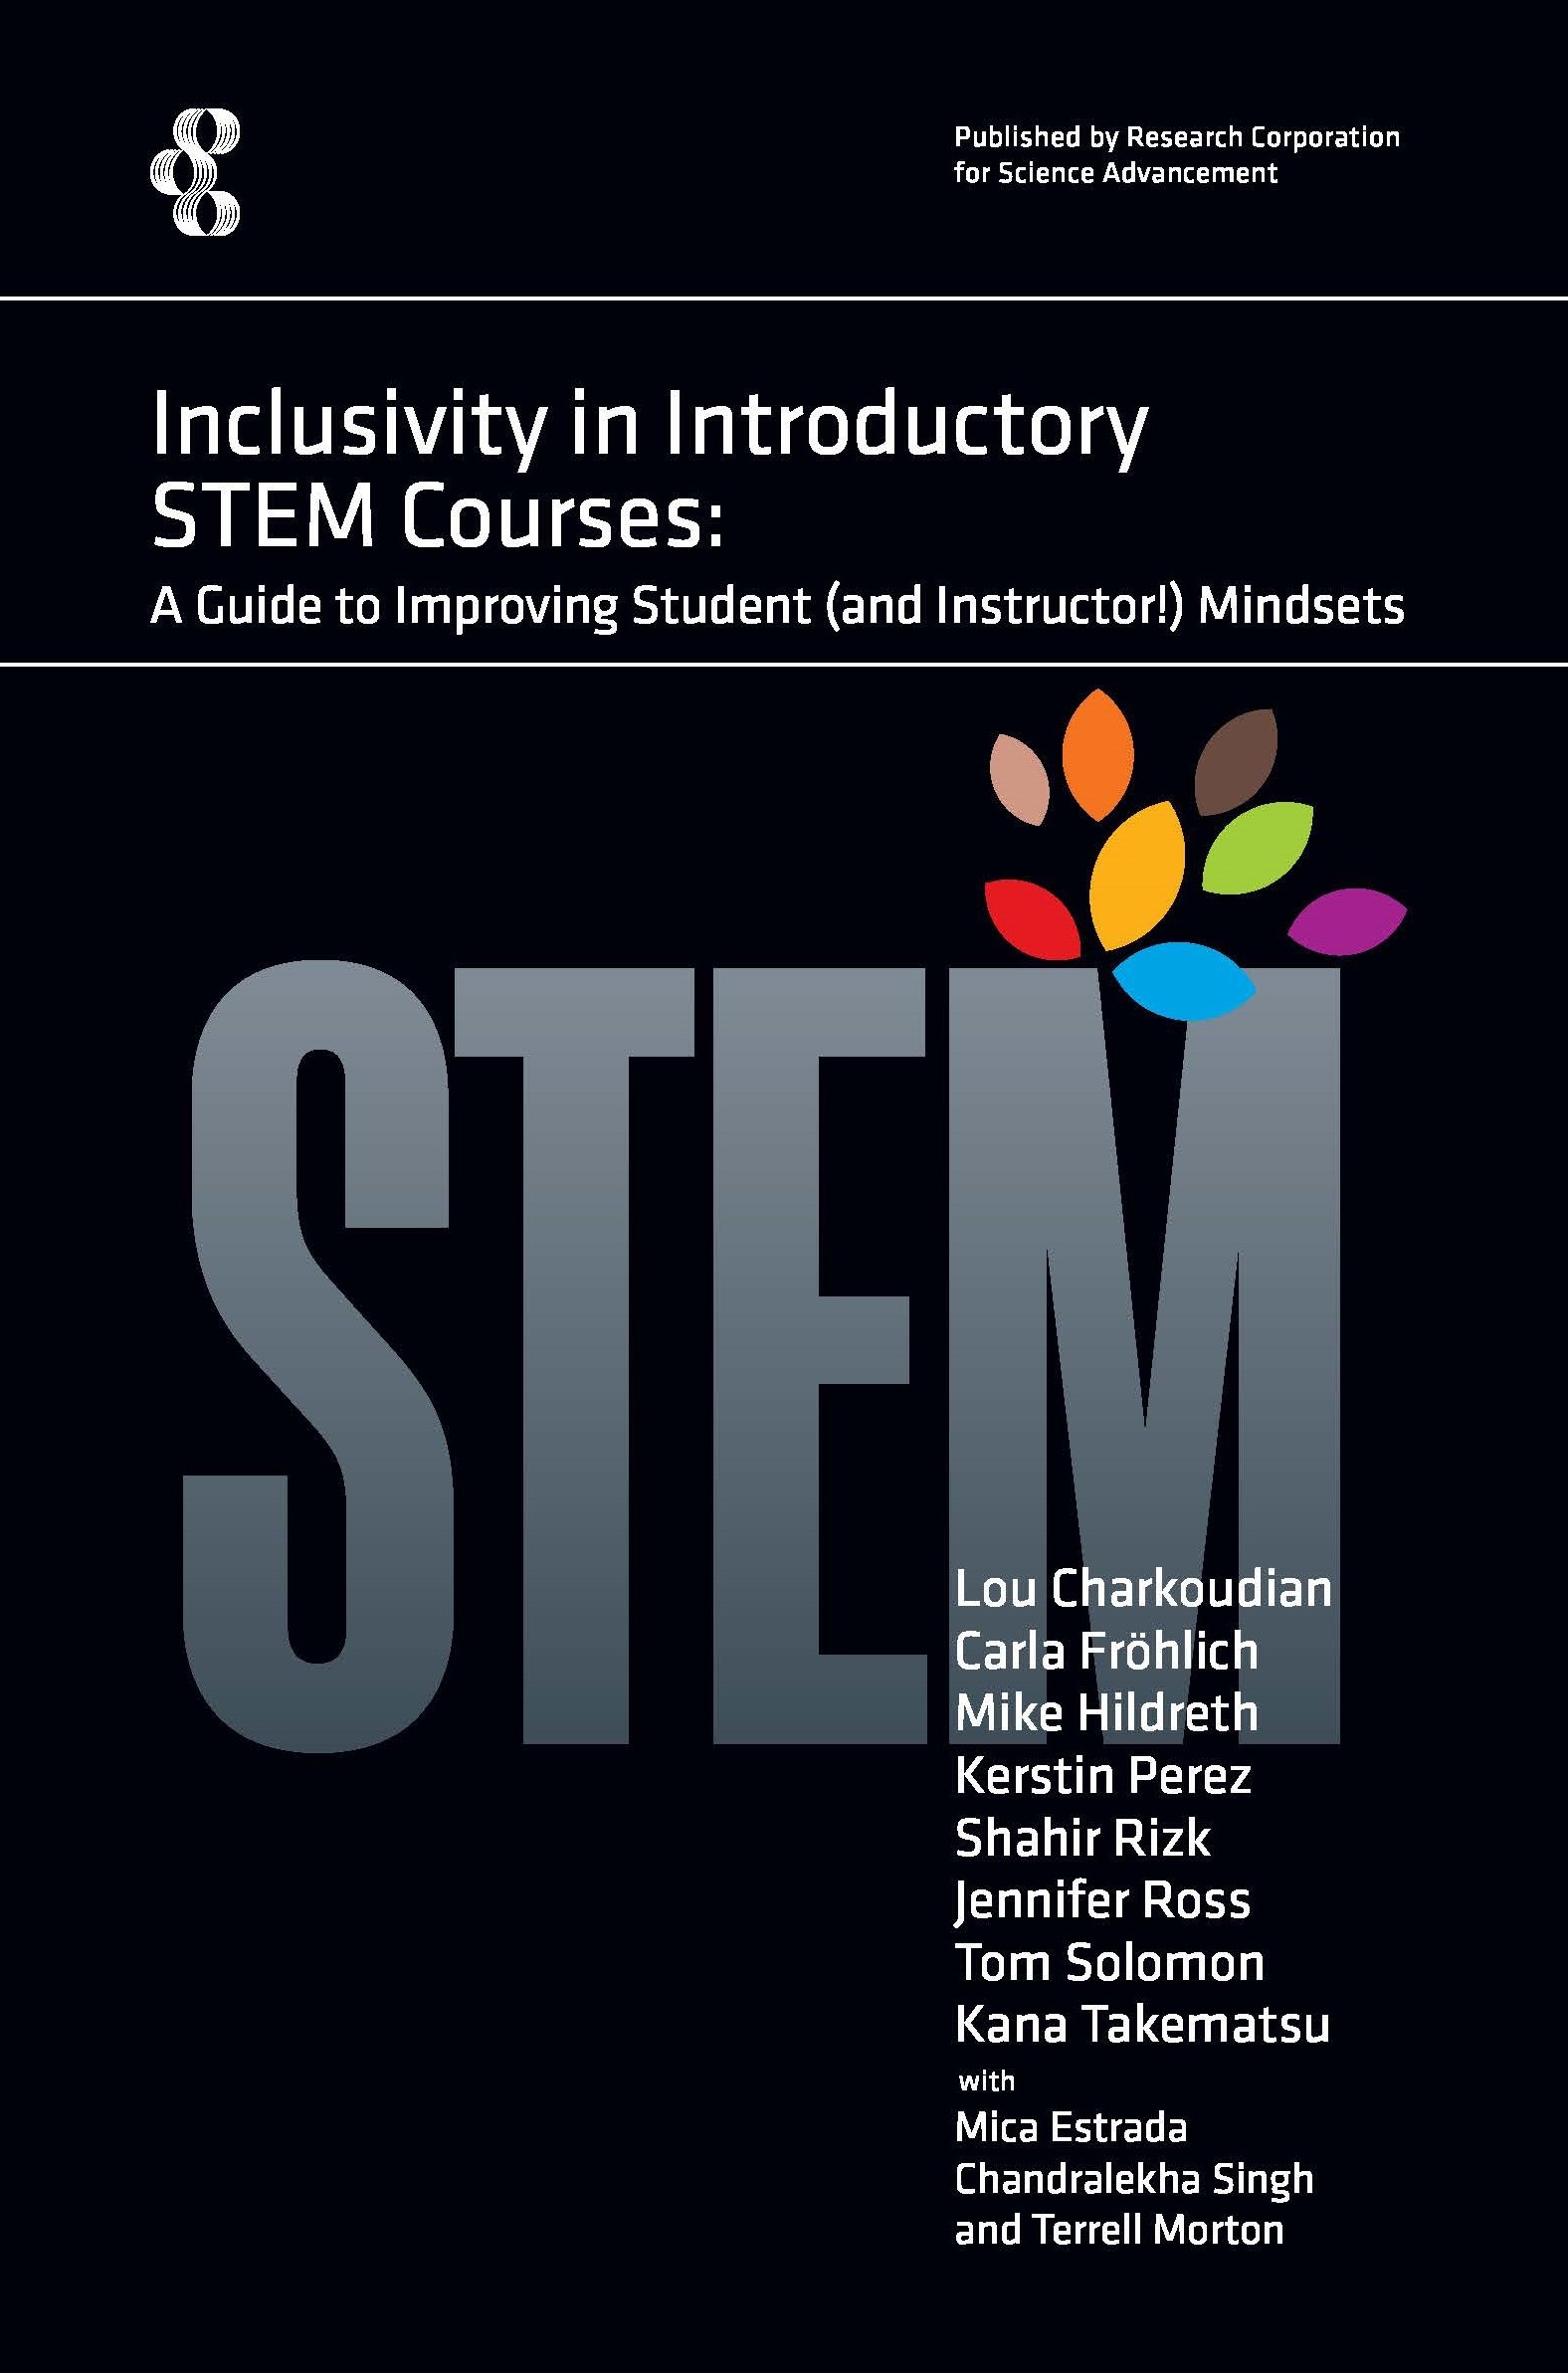  Inclusivity in Introductory STEM Courses: A Guide to Improving Student (and Instructor!) Mindsets